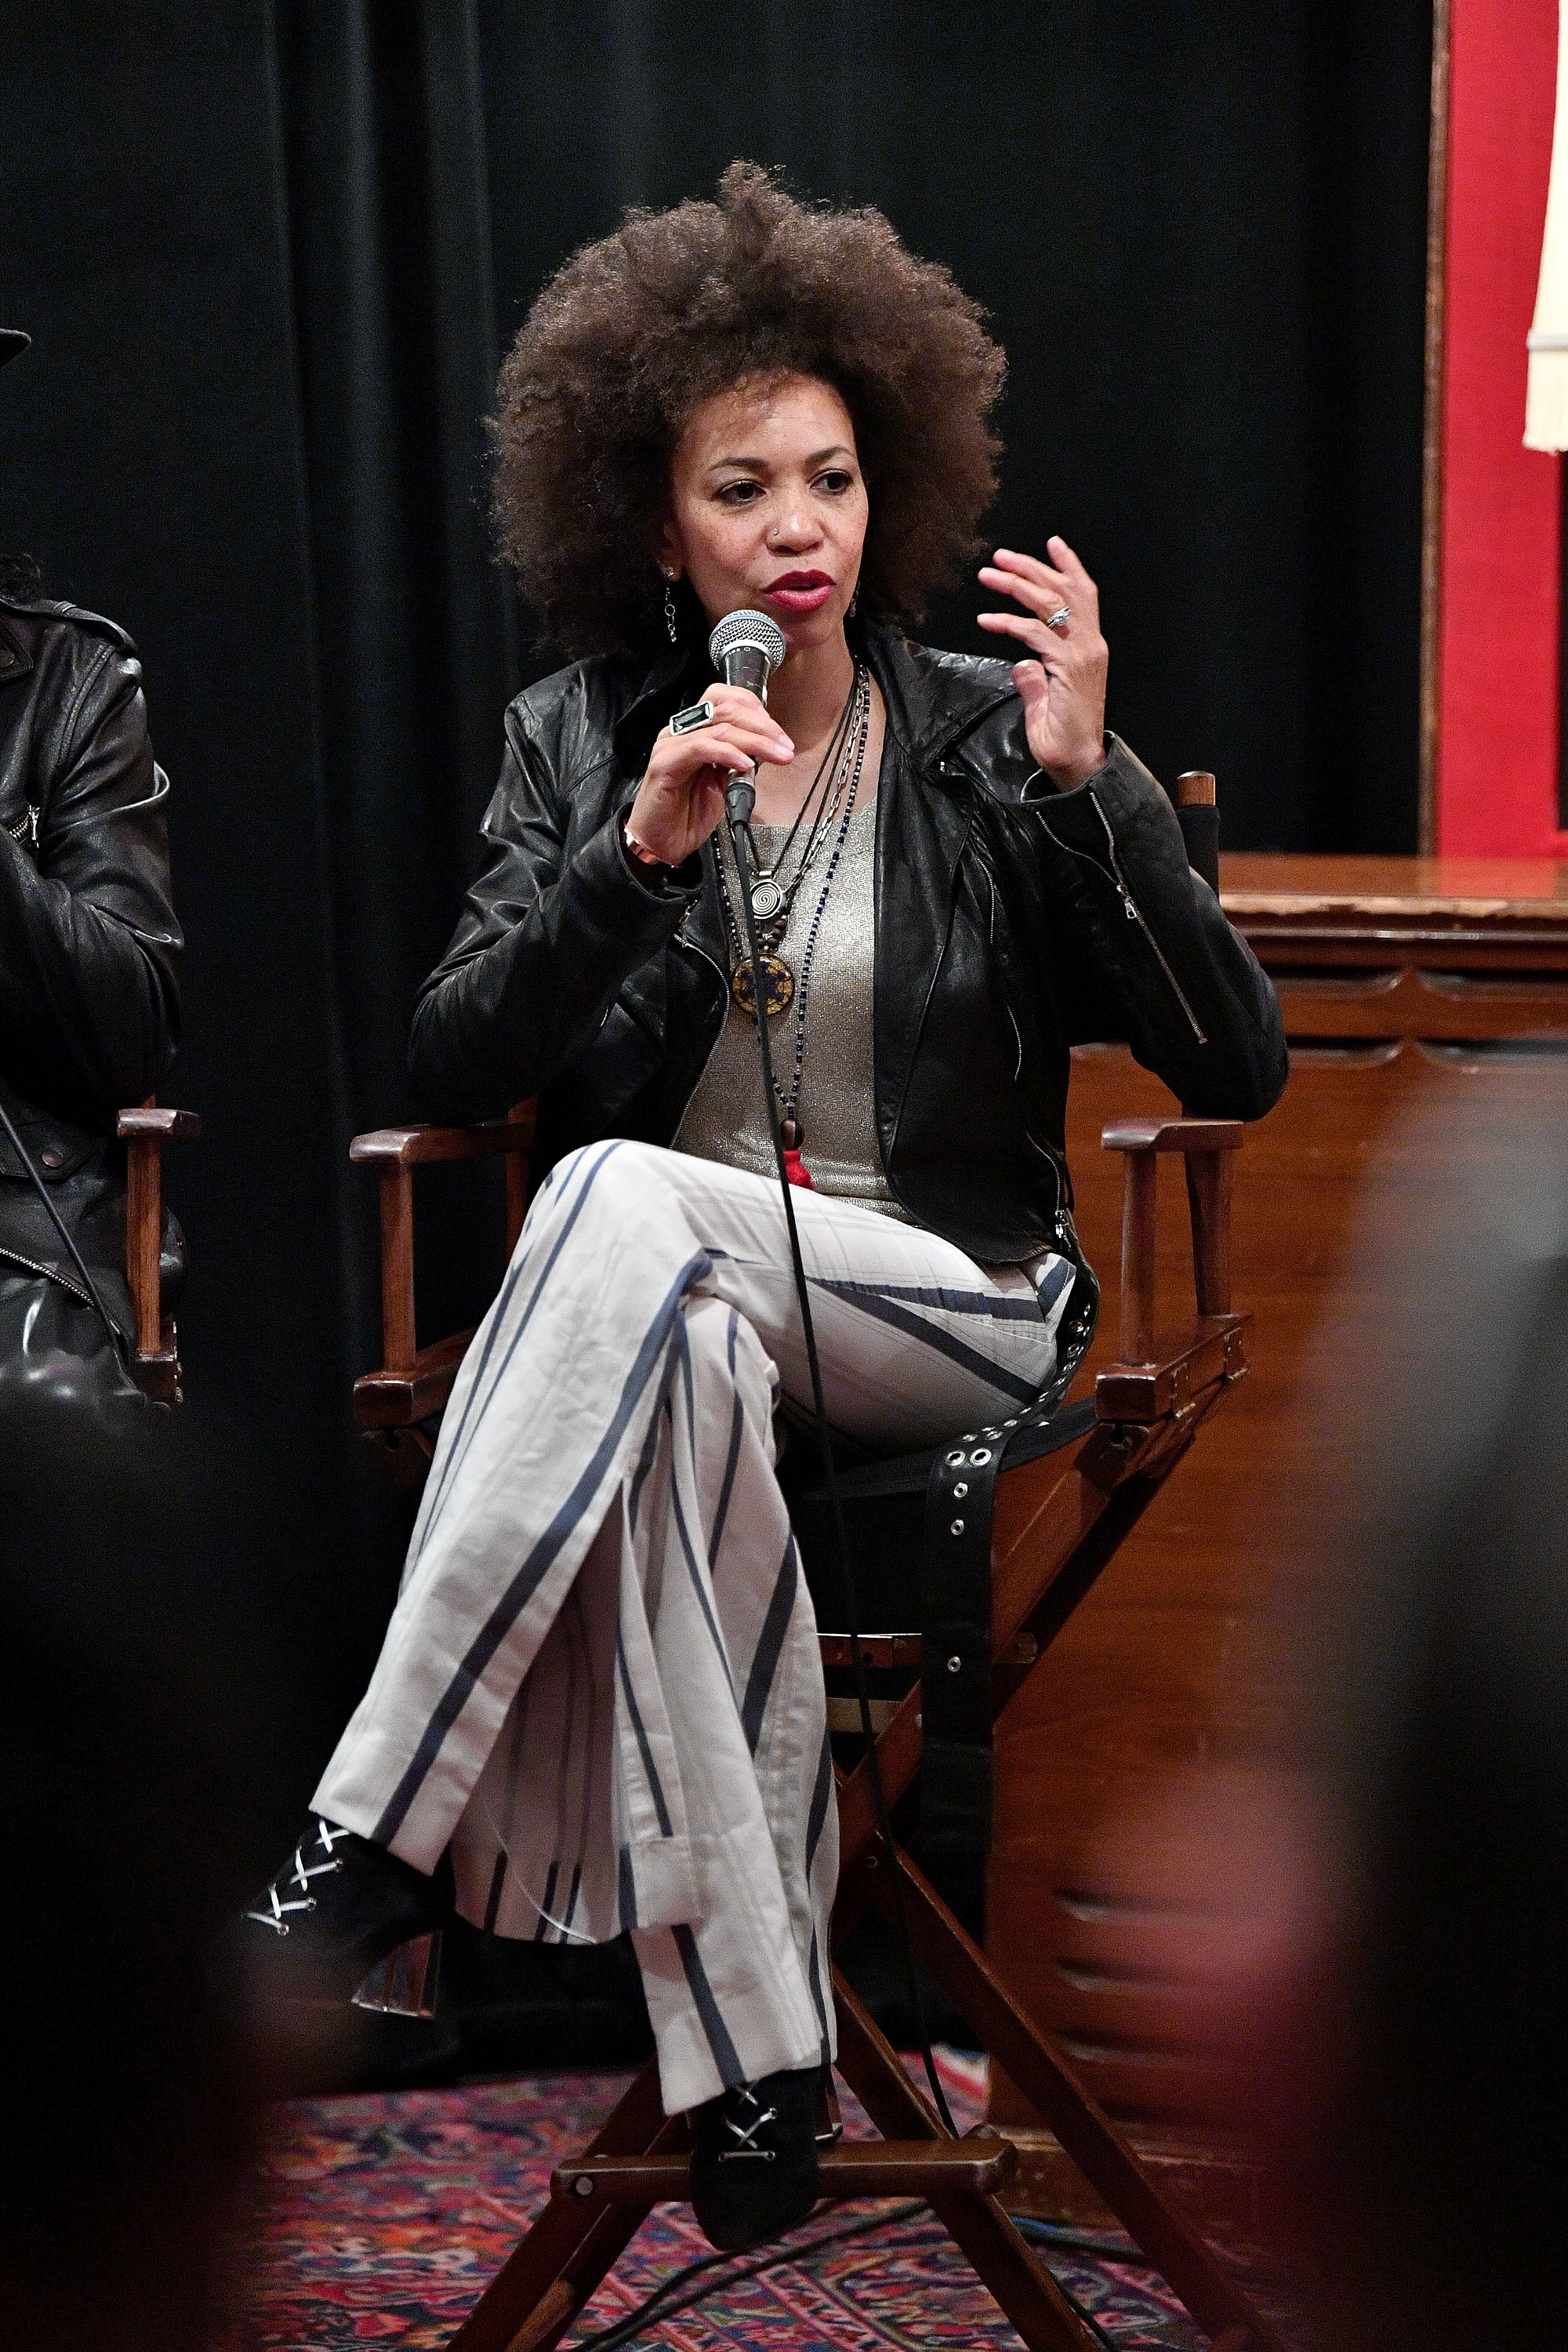 Cindy Blackman in New York 2017. | Source: Getty Images